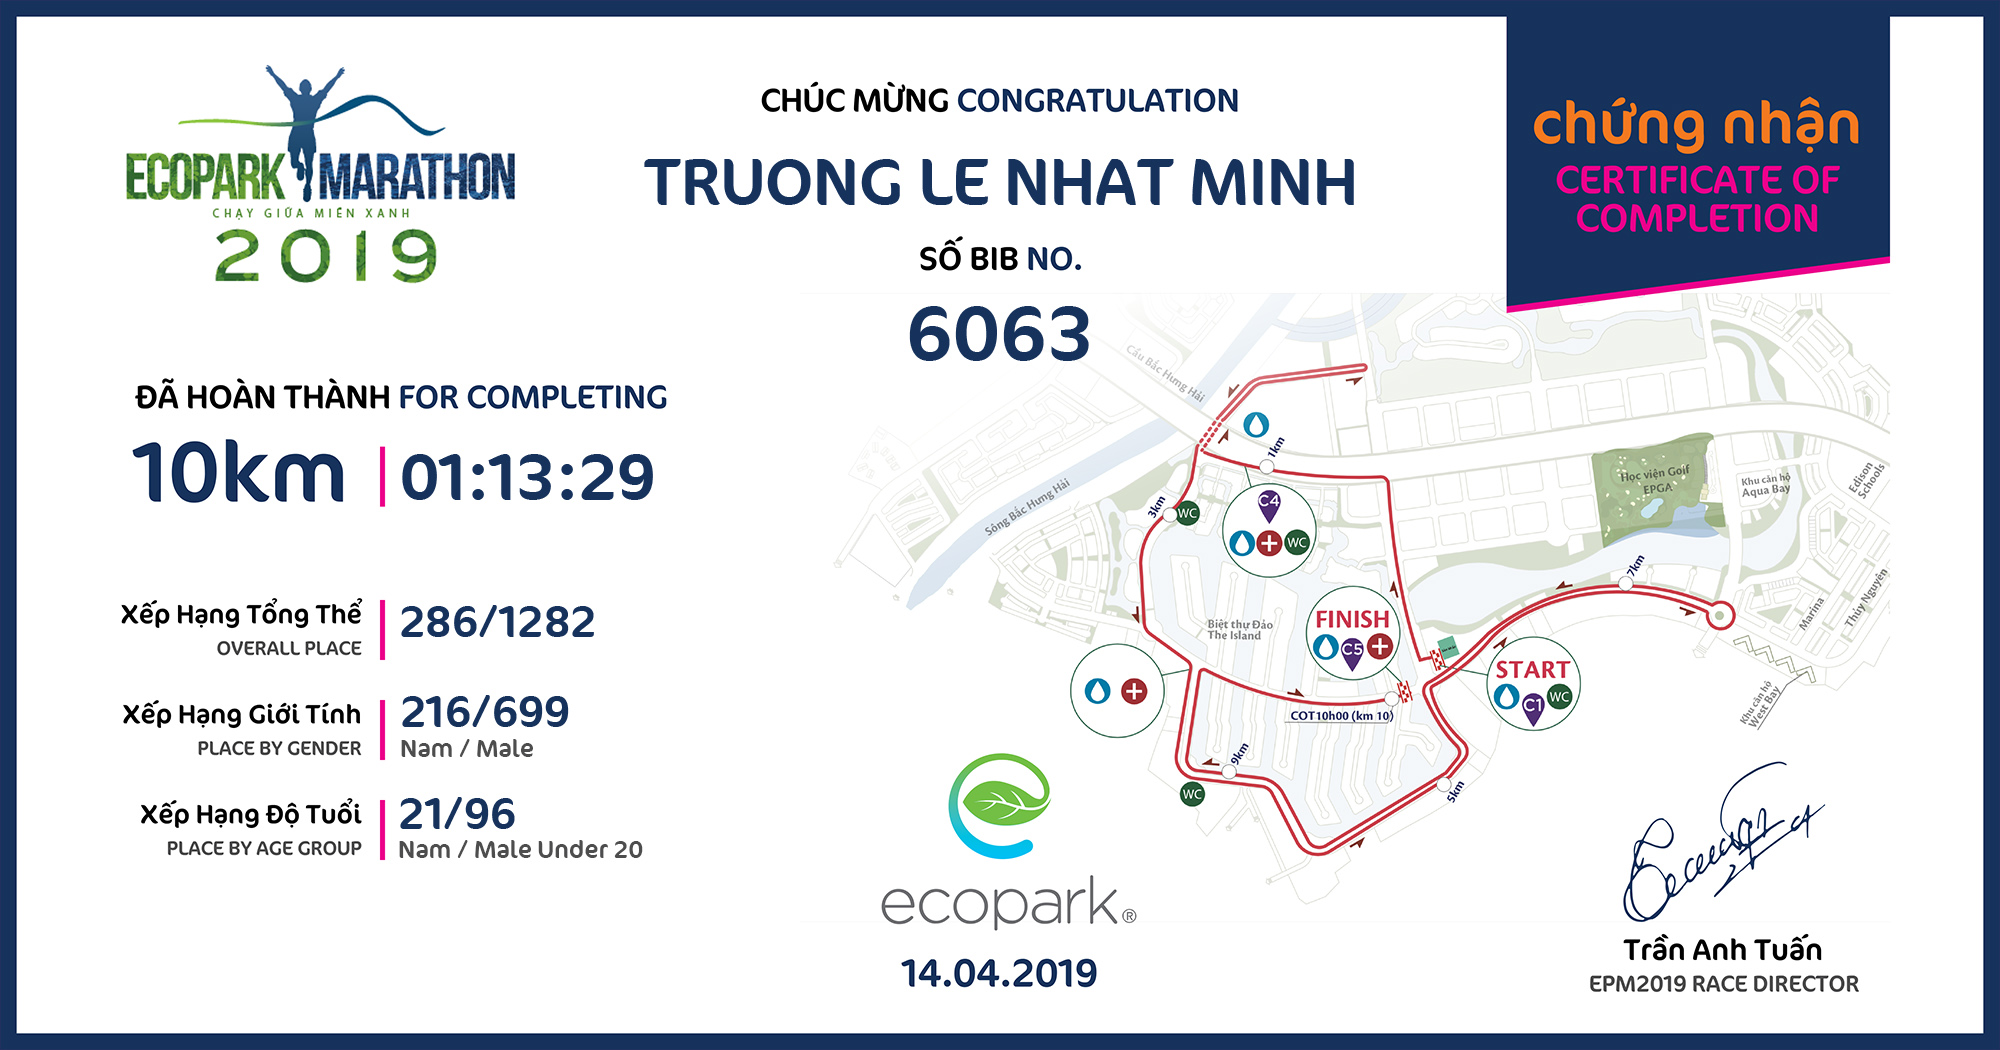 6063 - Truong Le Nhat Minh